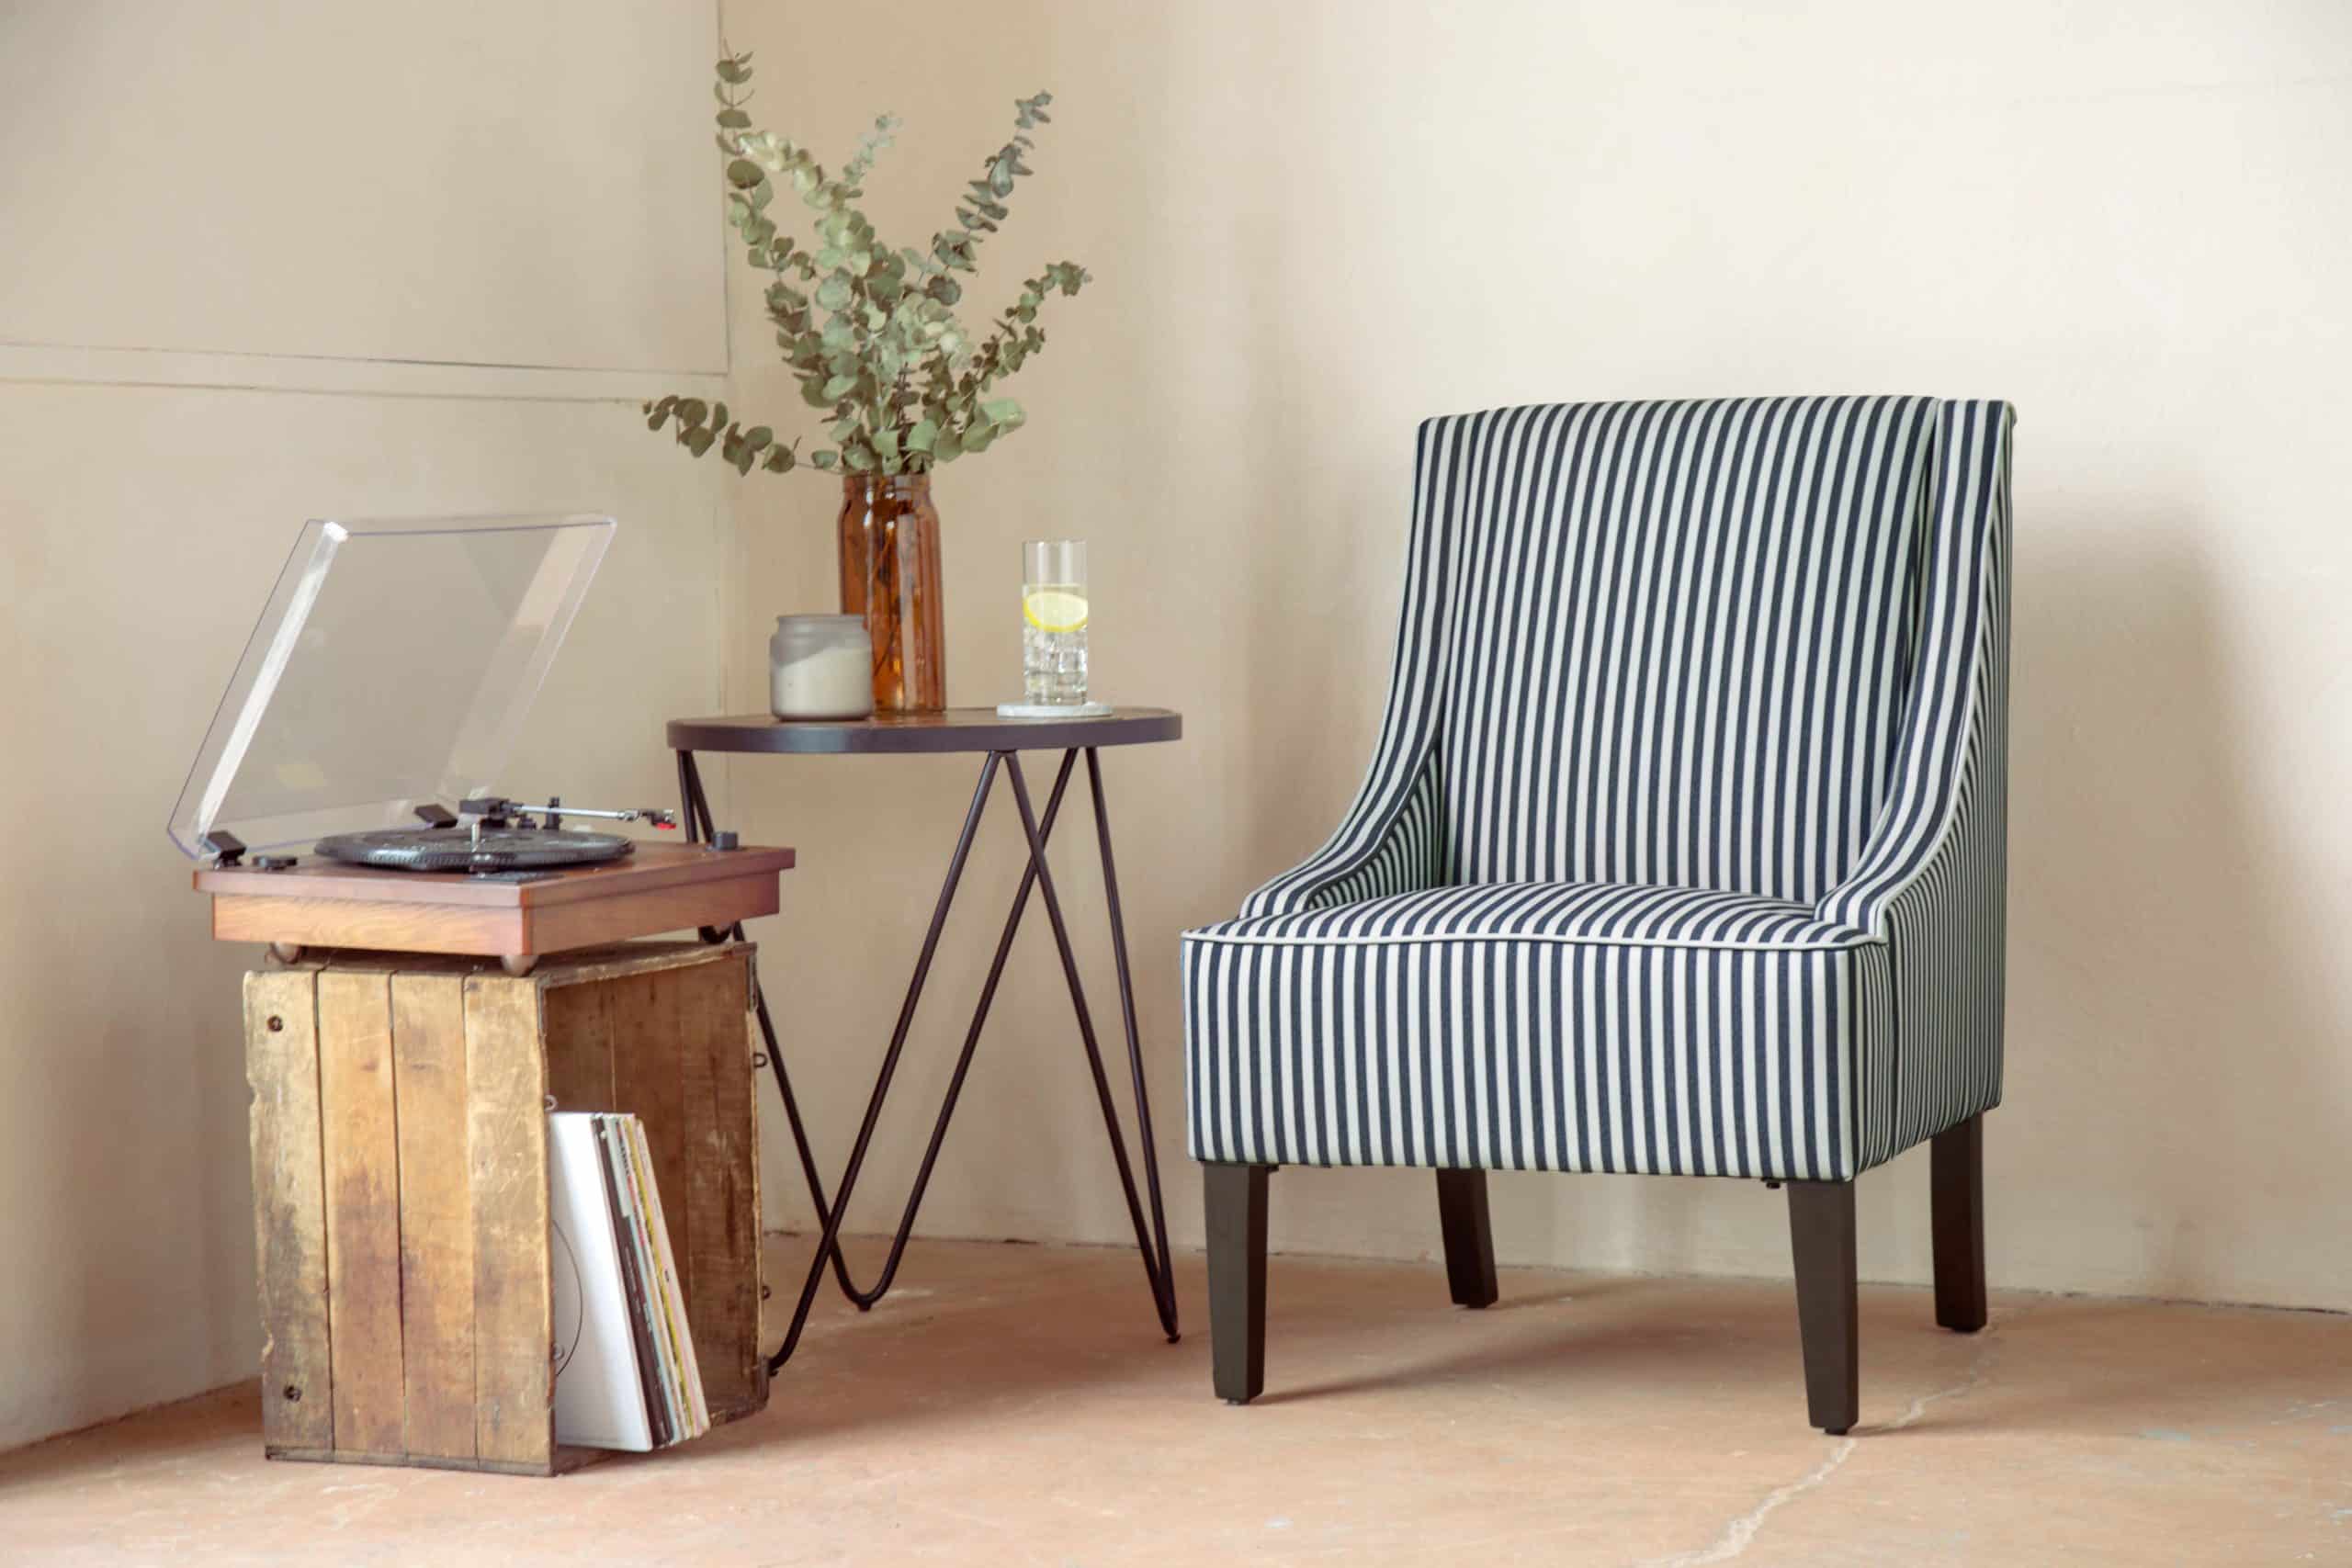 A Wovenbyrd Navy Stripe Swoop Arm Accent Chair makes adds coziness to a living space.